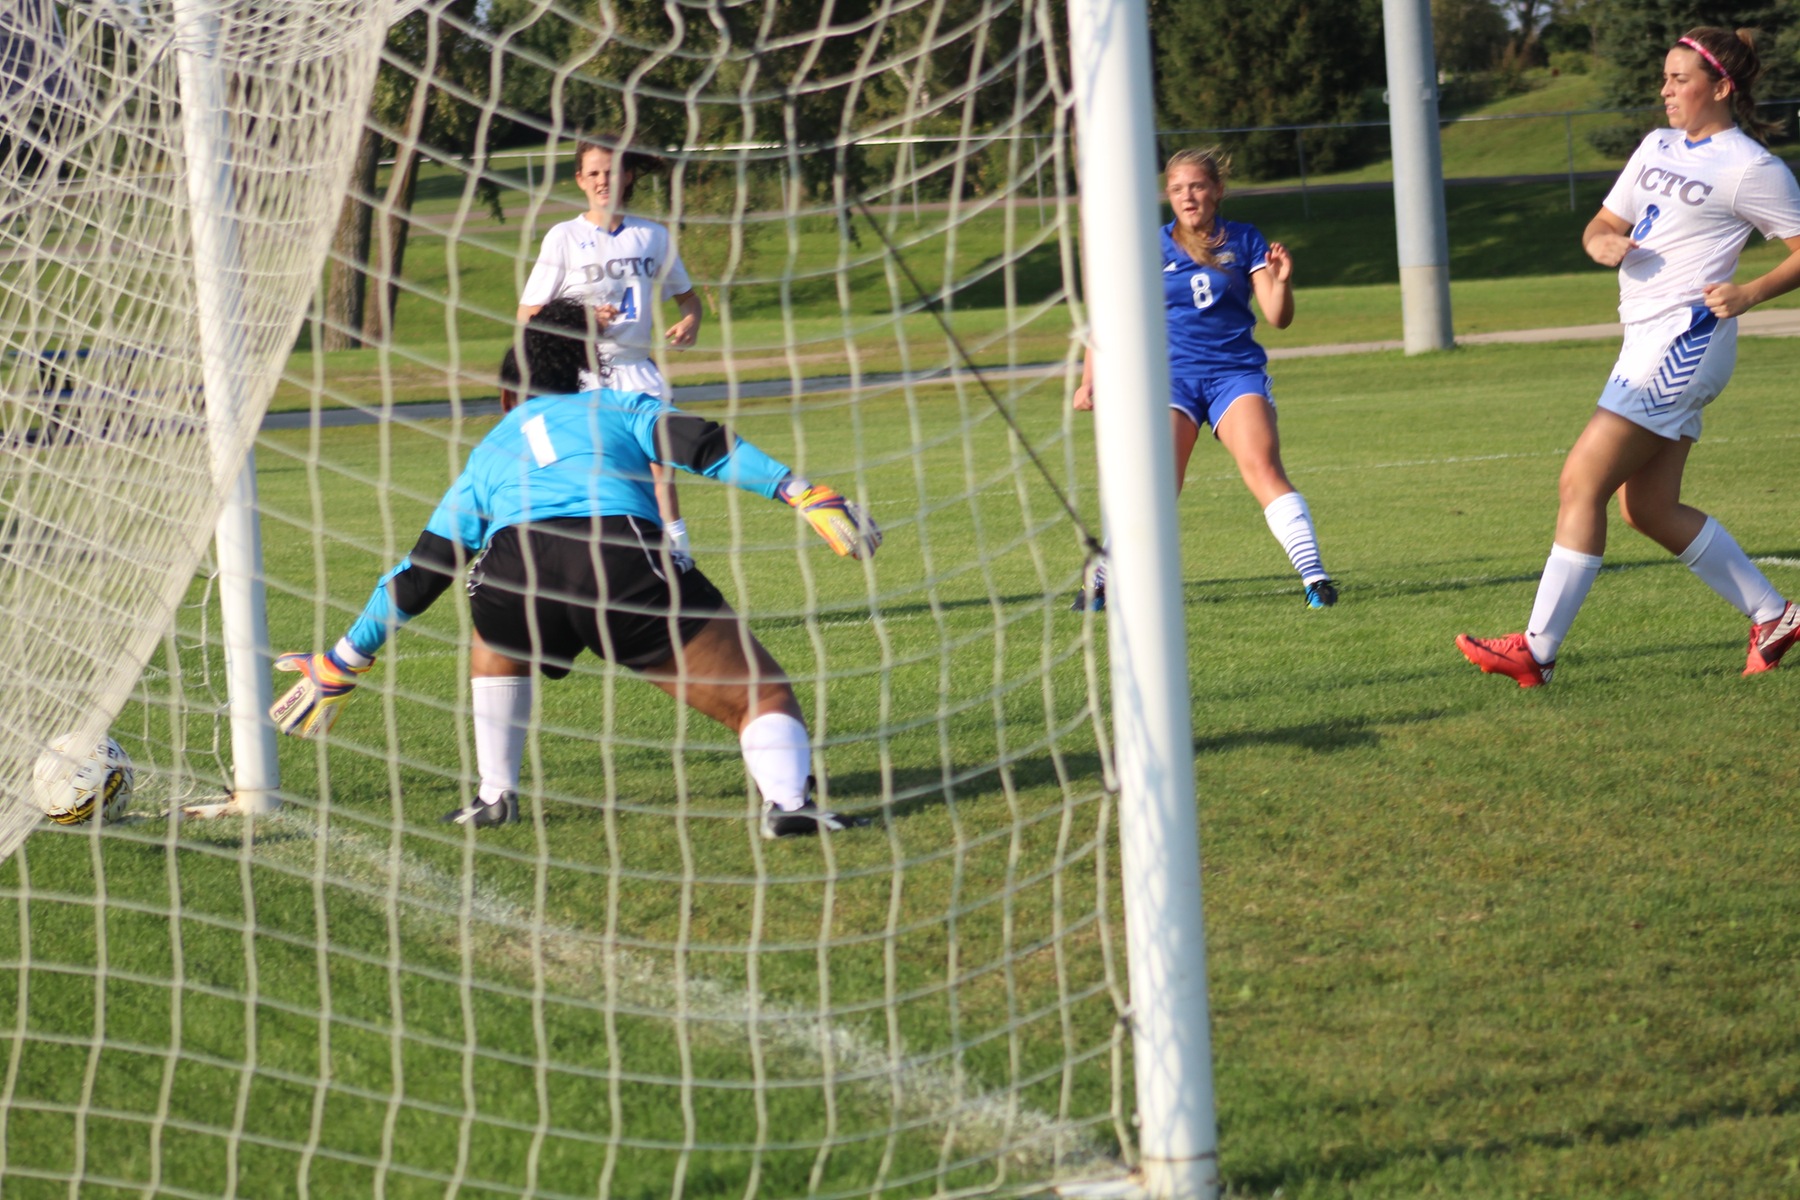 Rylie Smith scores the first goal of the season for the NIACC women's soccer team in Saturday's match against DCTC.